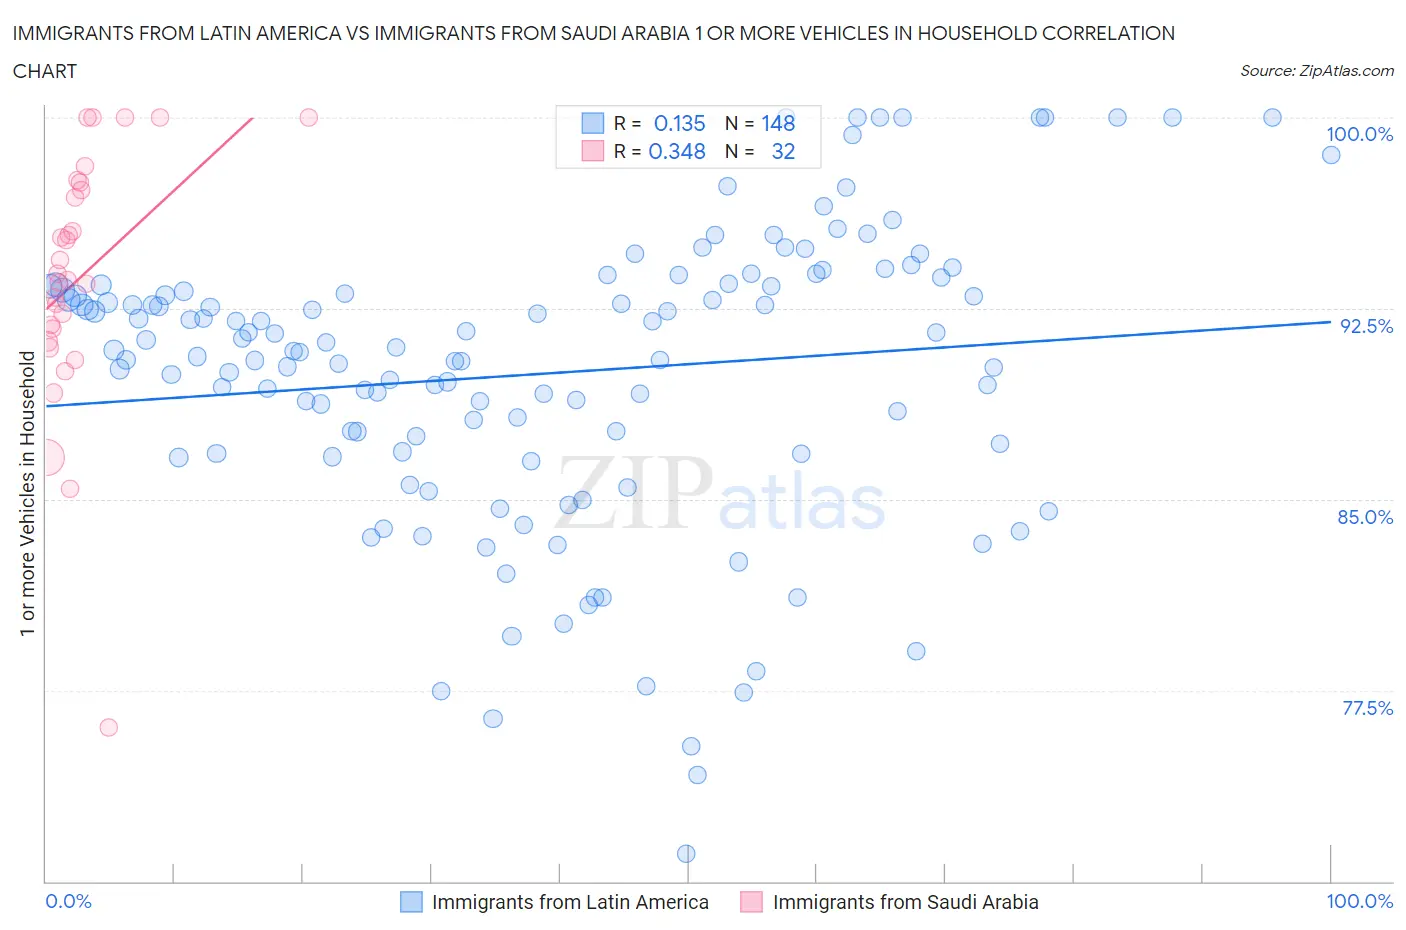 Immigrants from Latin America vs Immigrants from Saudi Arabia 1 or more Vehicles in Household